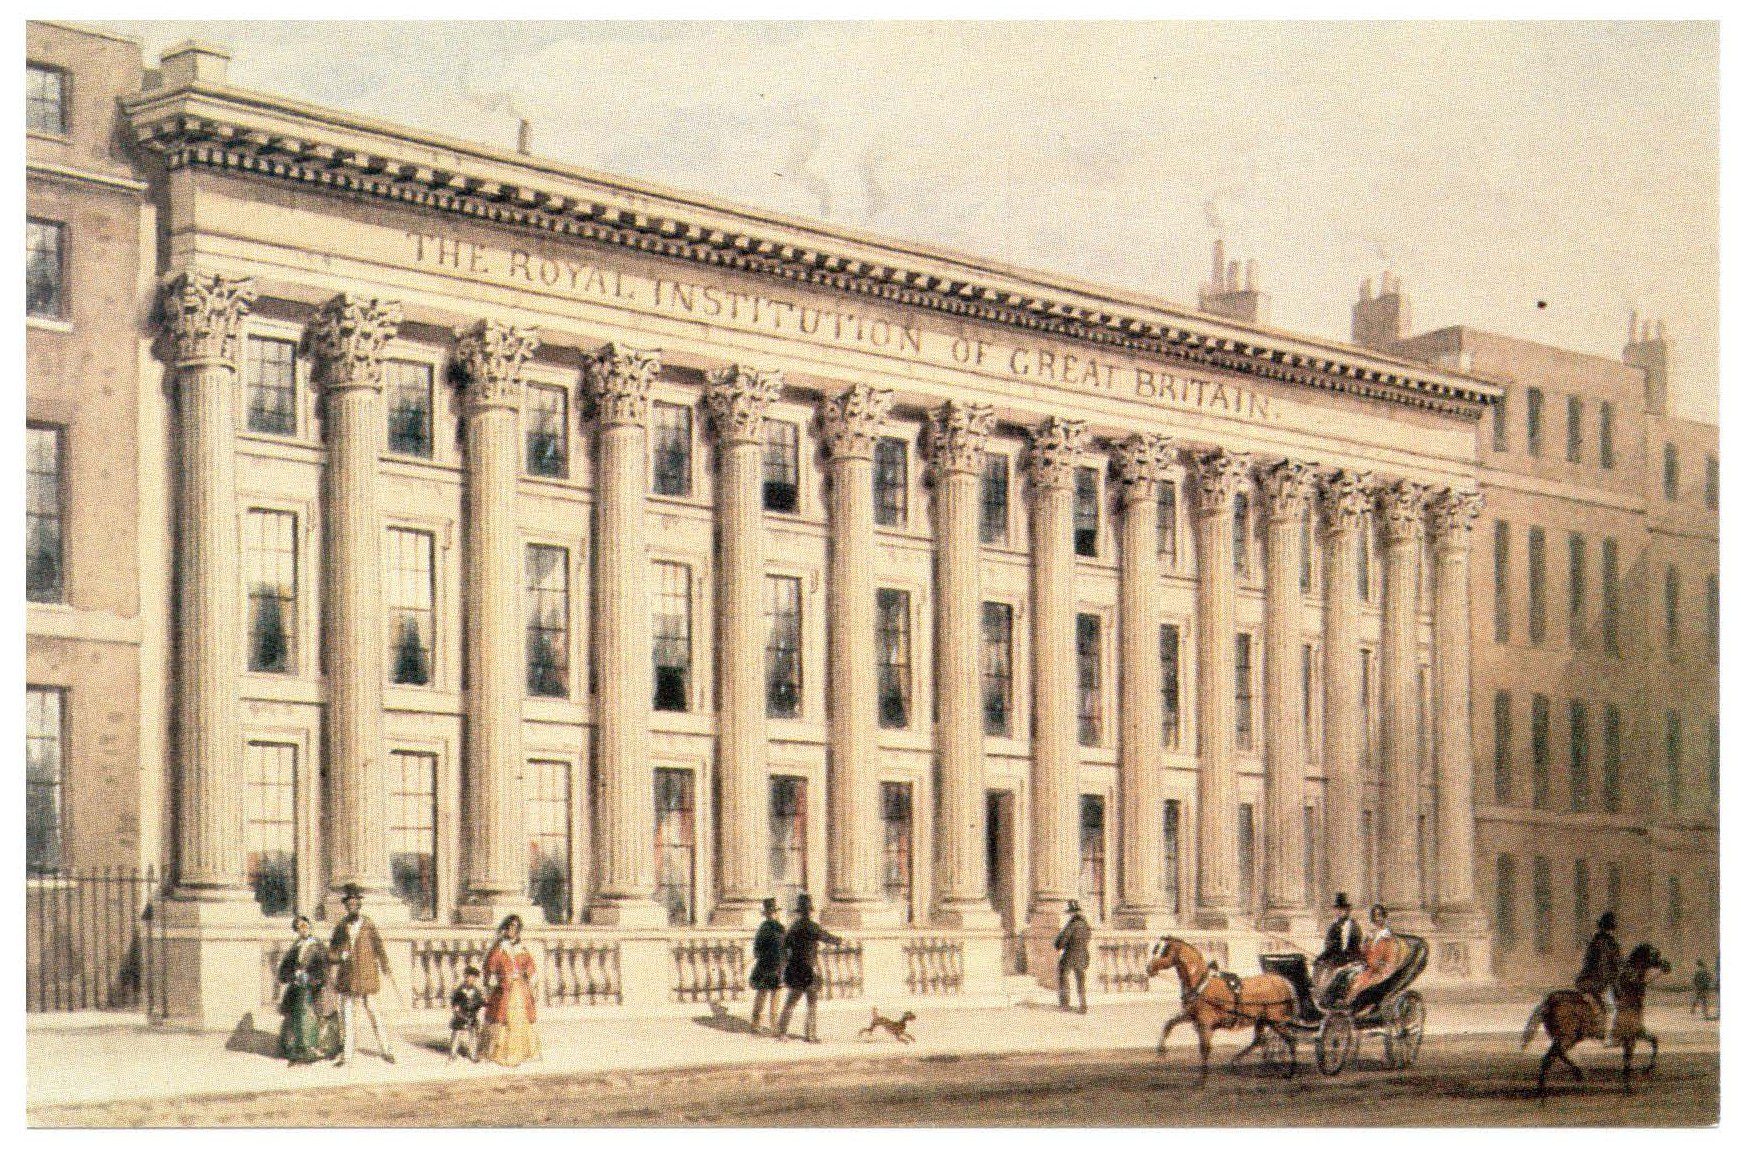 Painting of The Royal Institution